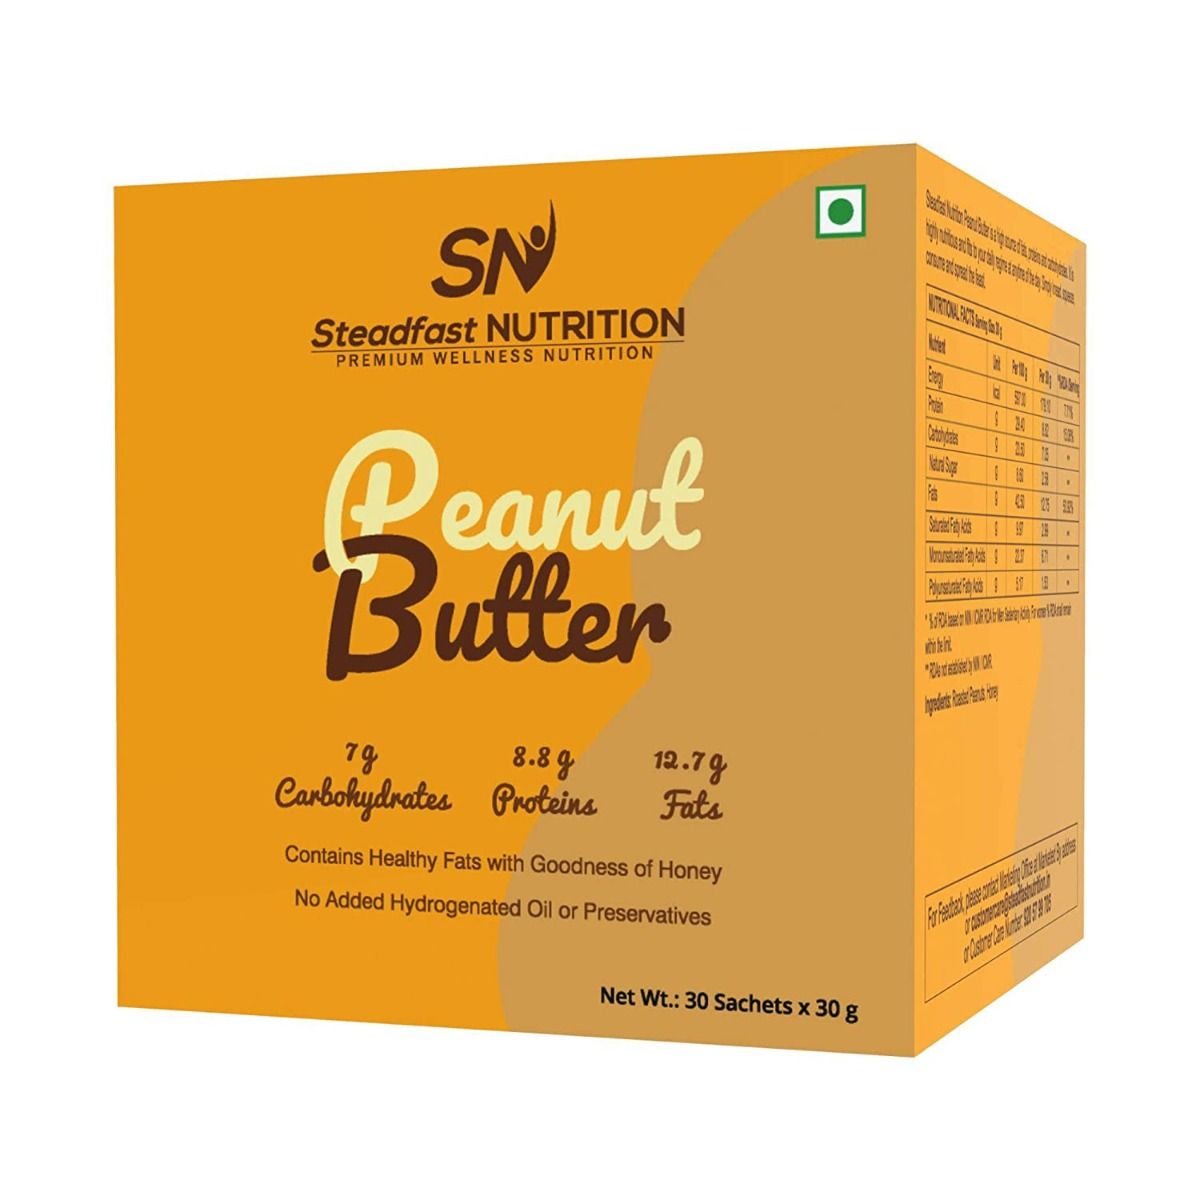 Steadfast Nutrition Peanut Butter, 30 gm, Pack of 1 